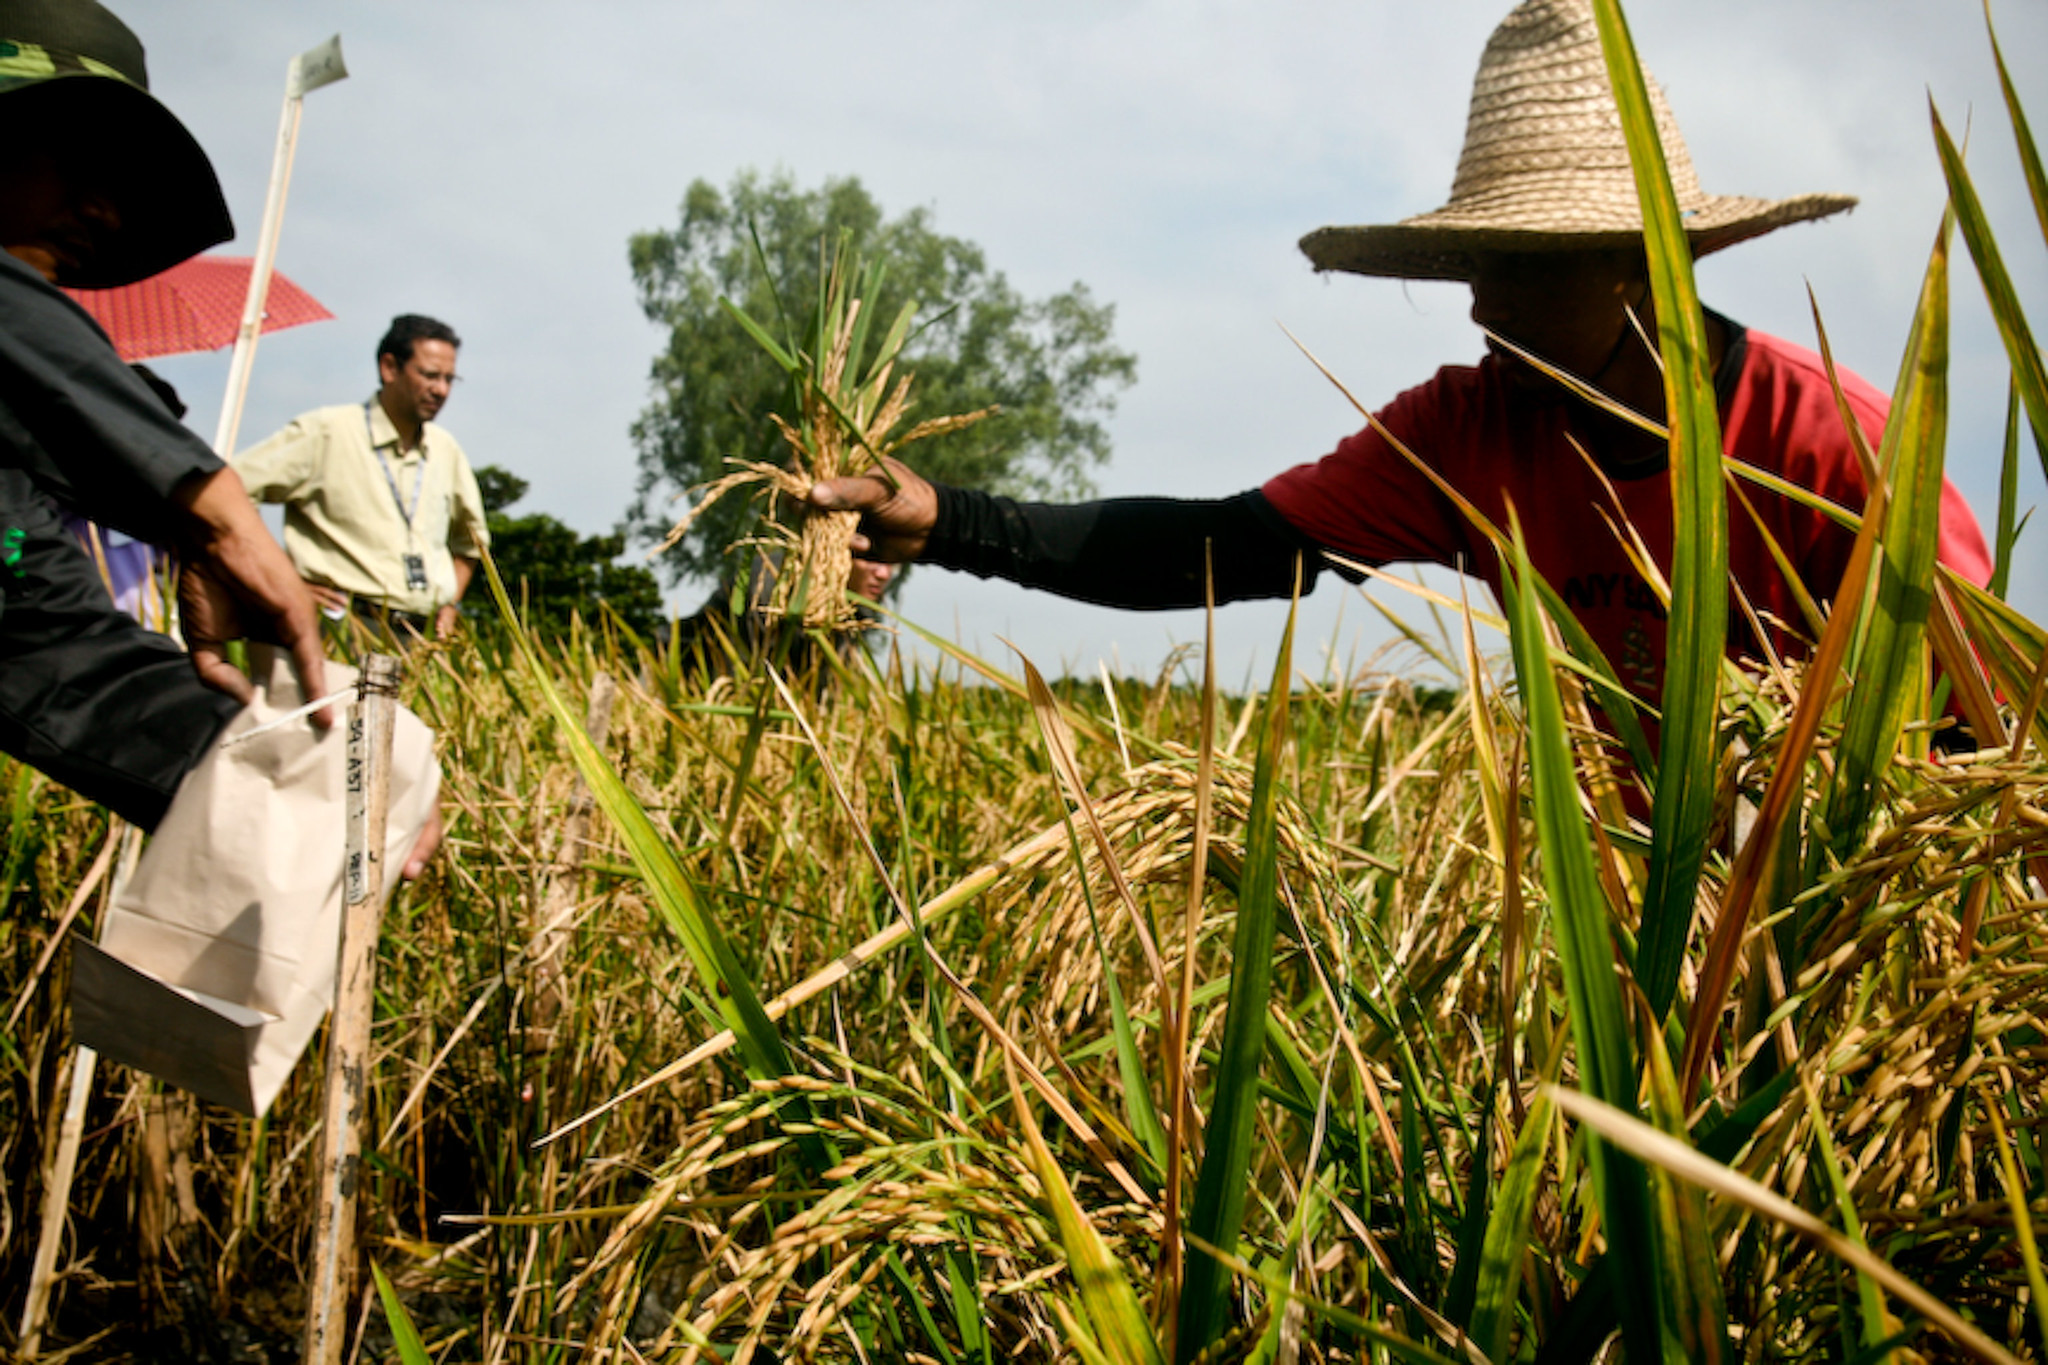 Harvesting Golden rice from am IRRI field trial in 2010. Twelve years later, the genetically modified rice is finally being grown at scale. (Courtesy of the International Rice Research Institute (IRRI).)